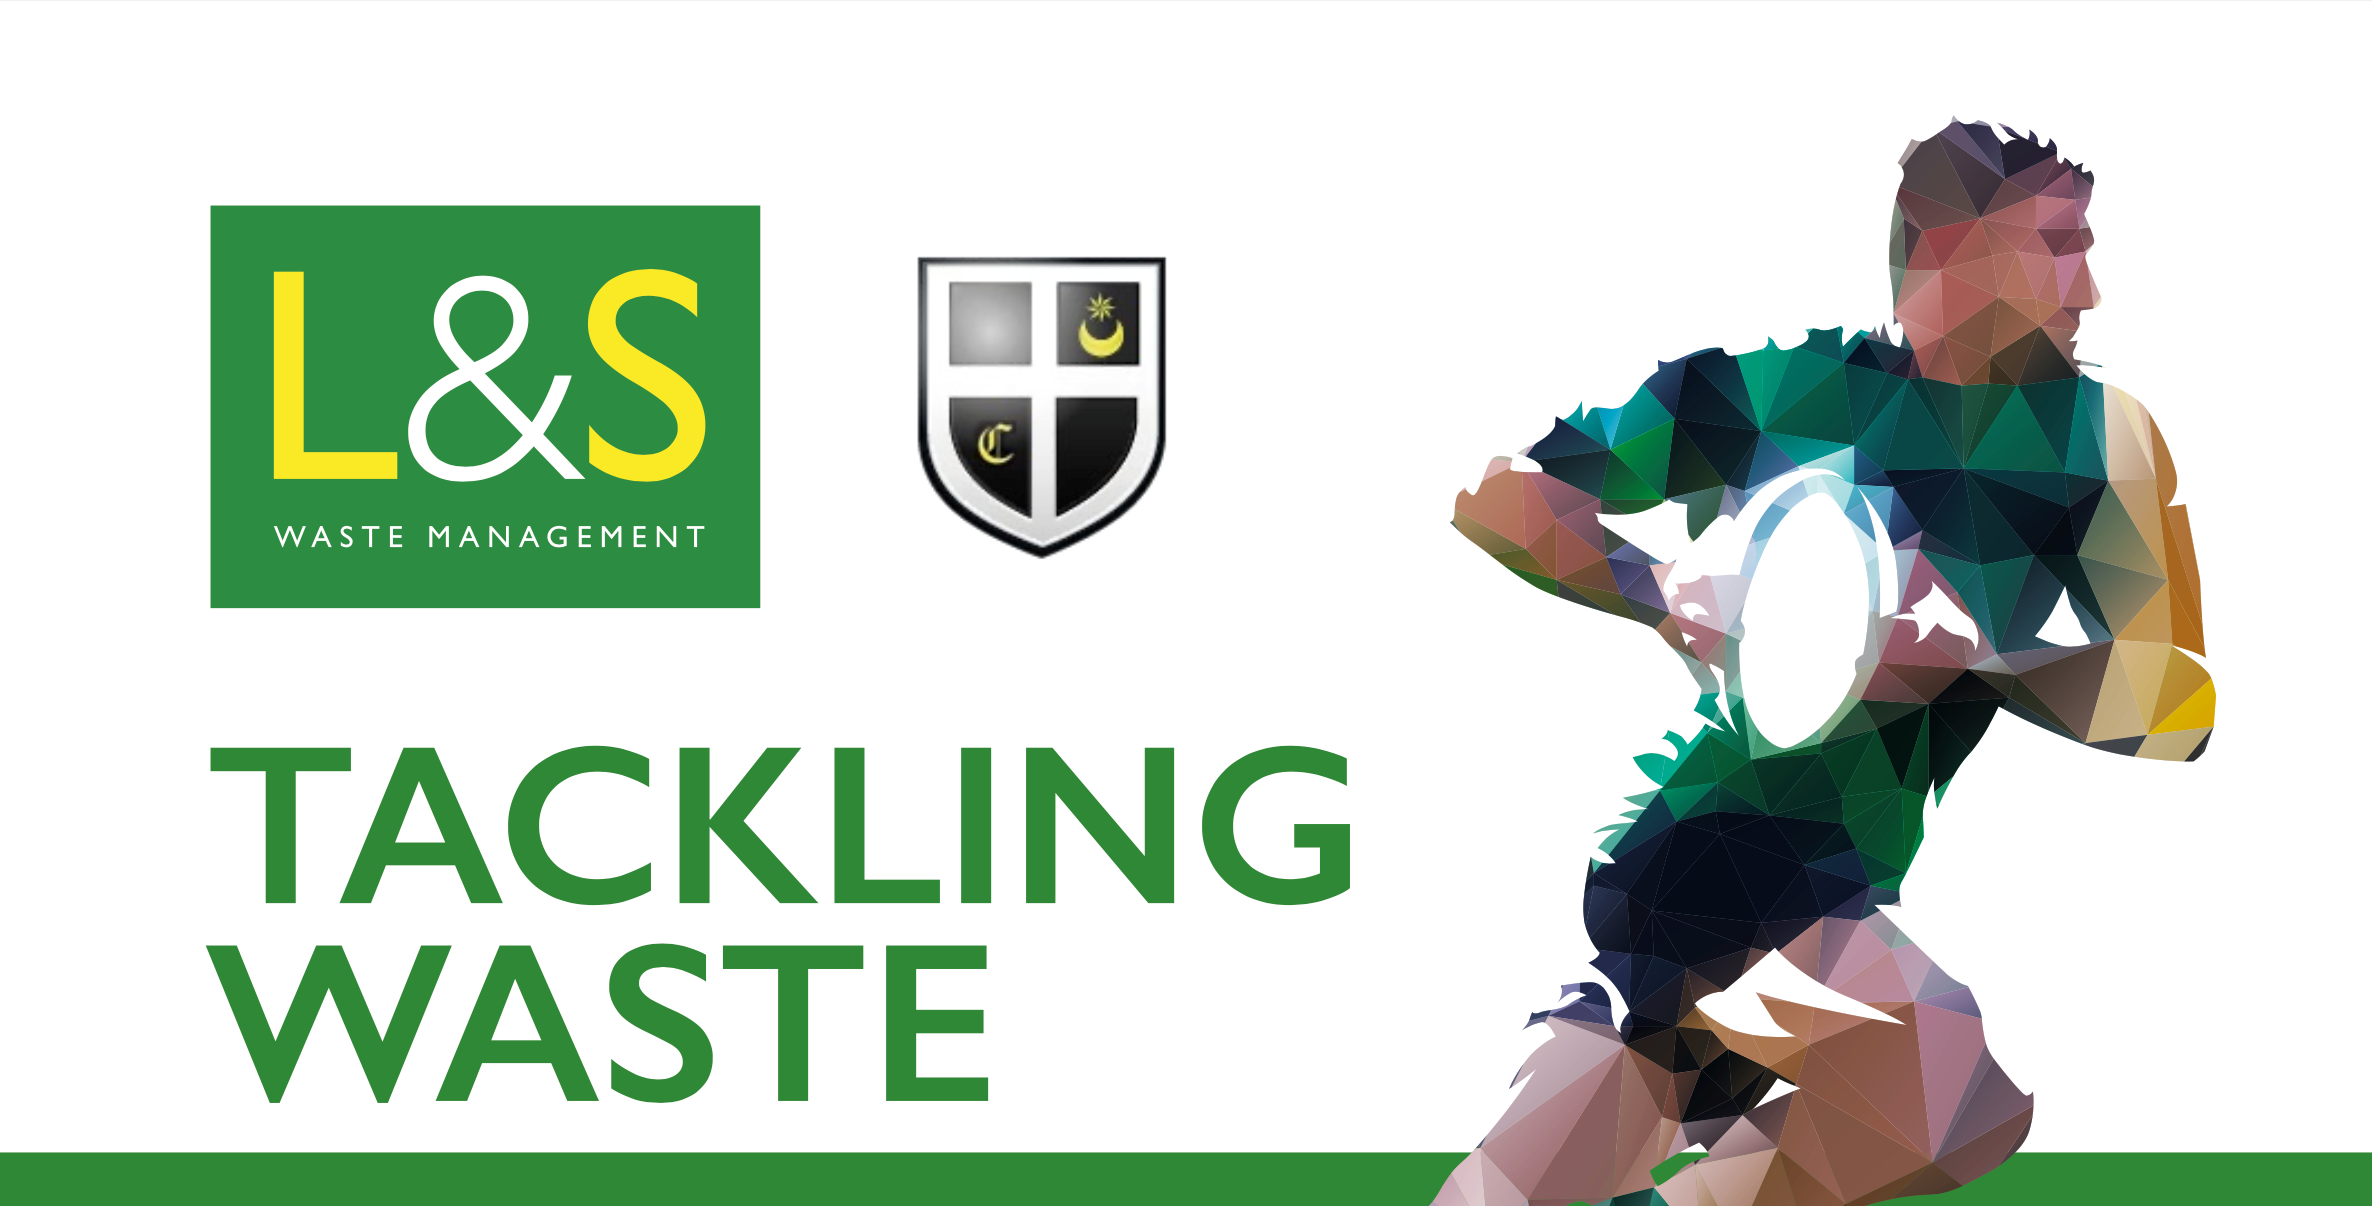 L&S Waste Management sign new sponsorship deal with Portsmouth Rugby Football Club L&S Waste Management